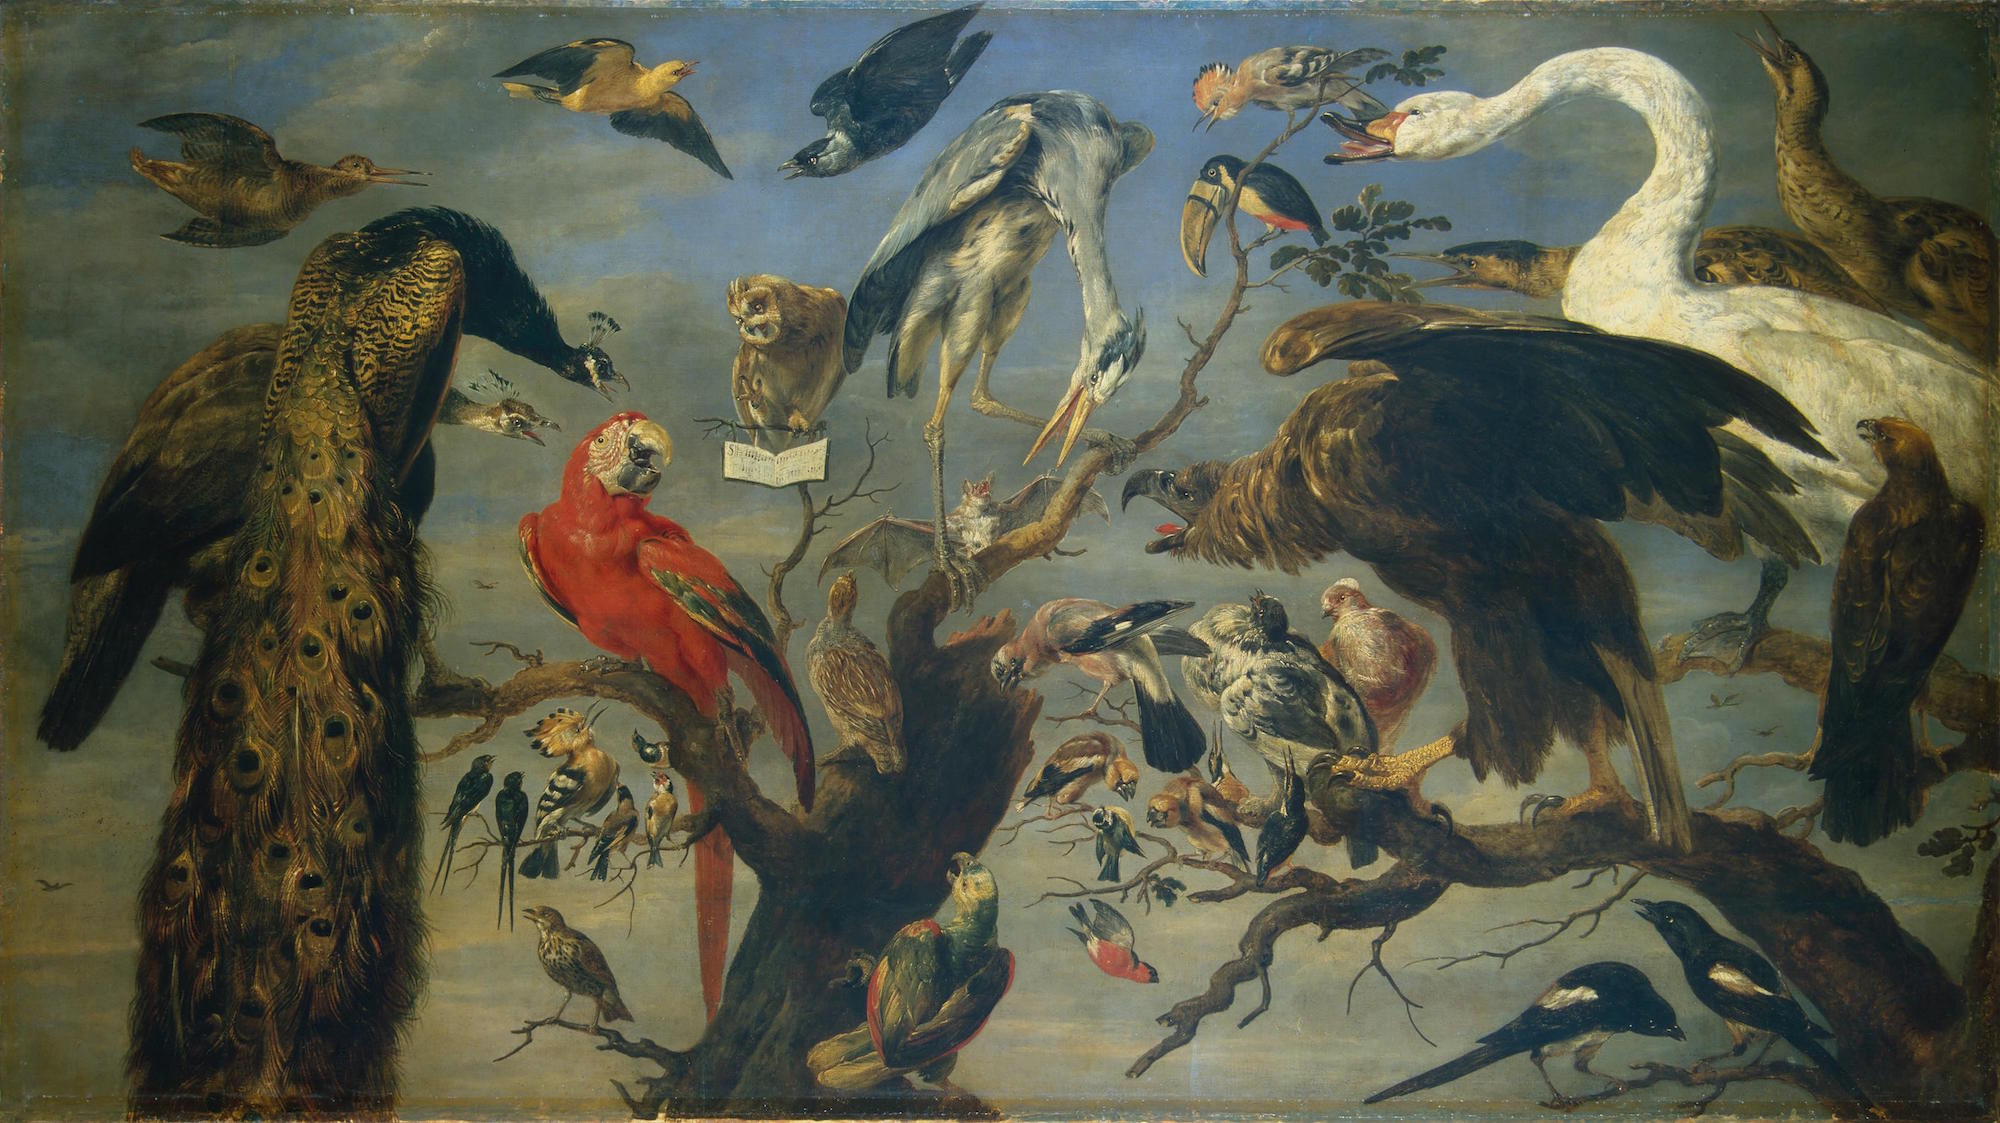 Bird's Concert by Frans Snyders - ca. 1630-1640 - 136,5 x 240 cm Hermitage Museum